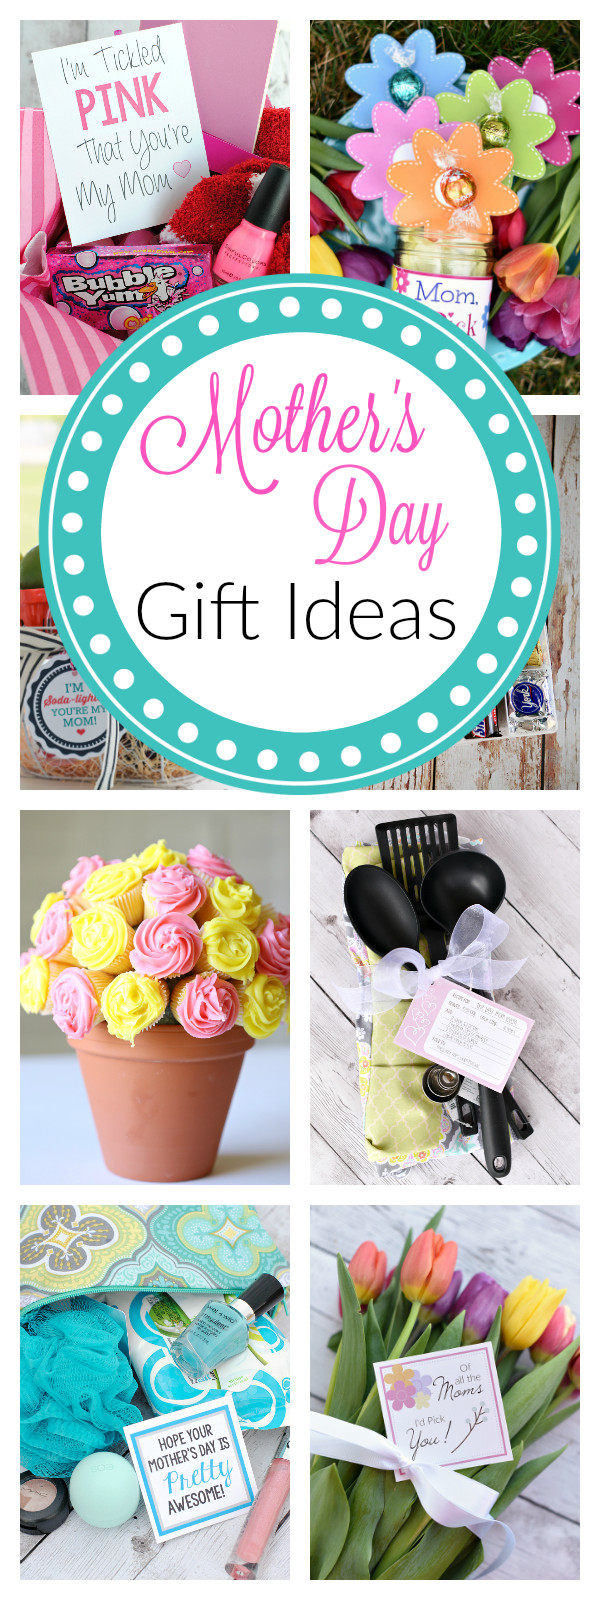 Gift Ideas For Mother'S Day
 25 Fun Mother s Day Gift Ideas – Fun Squared